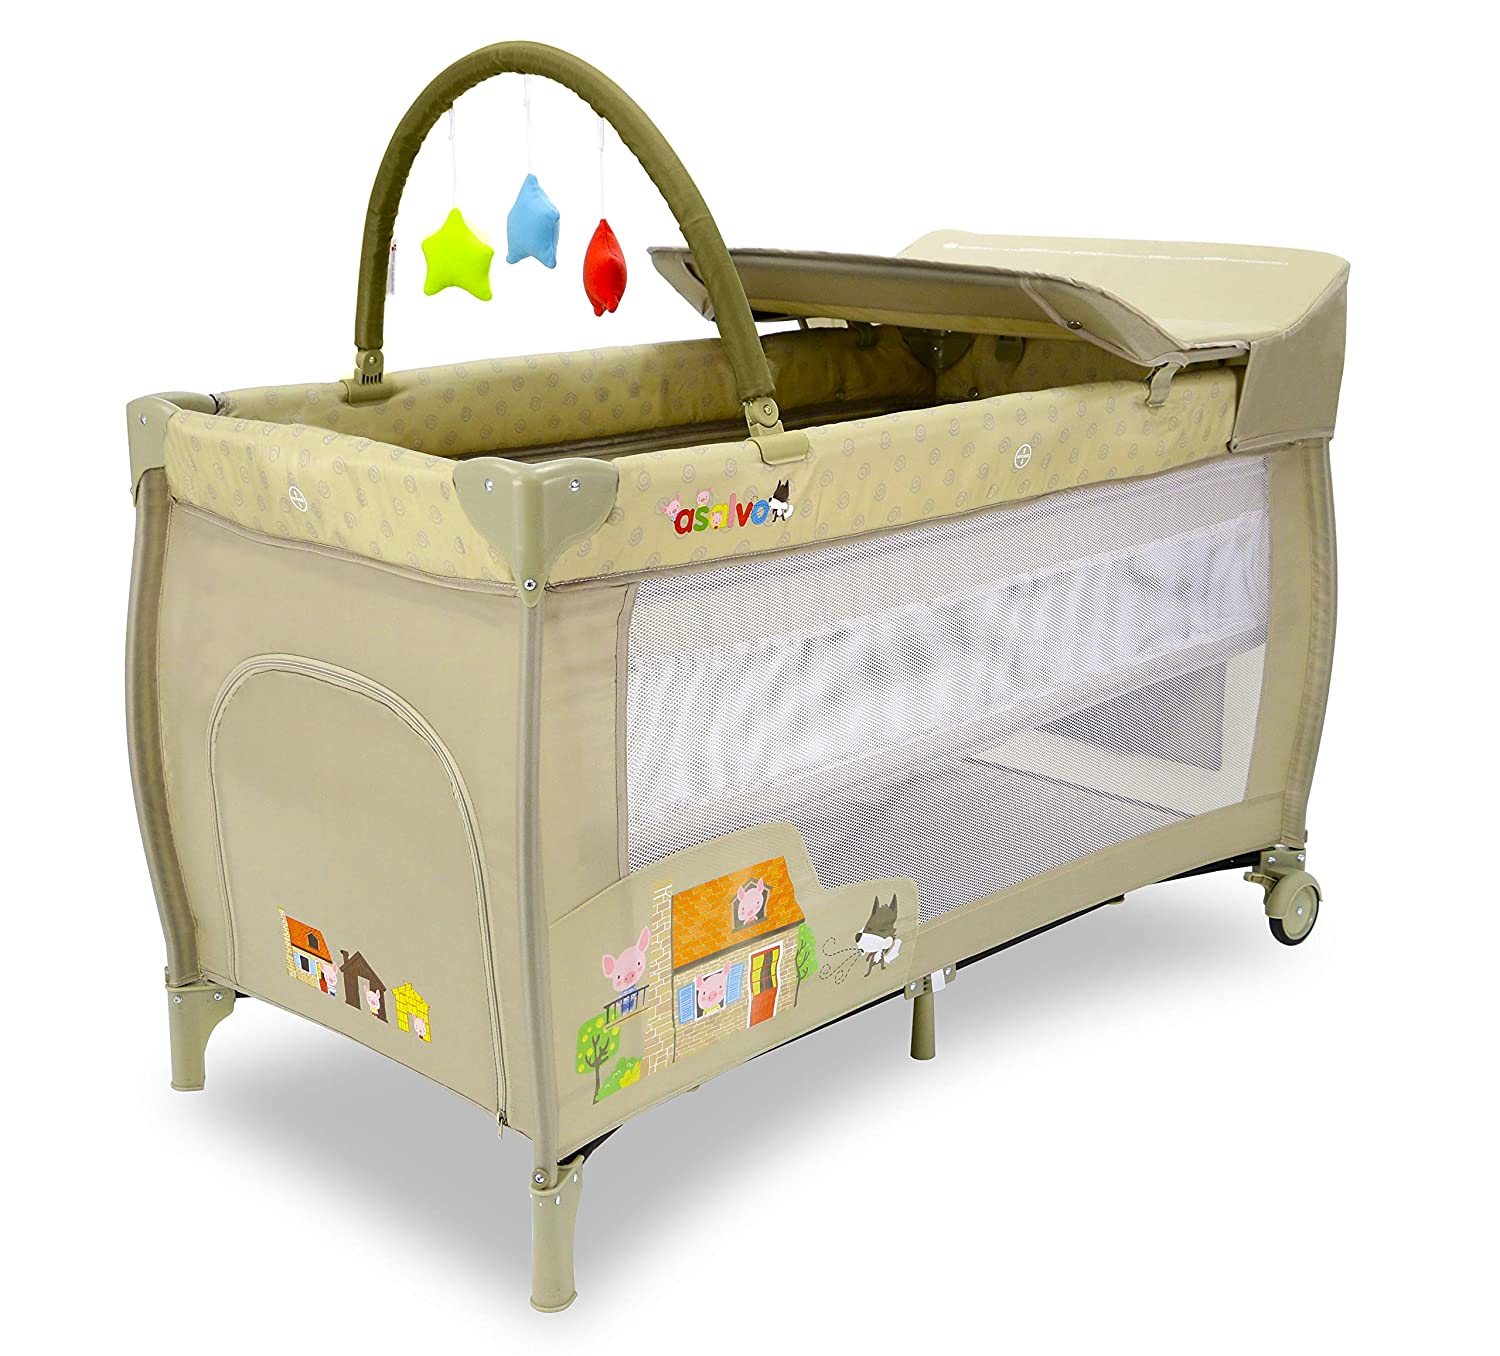 ASALVO Travel Cot, 120 x 60 Mix Plus for Babies from 0 to 15 kg/3 in 1, Baby Bed, Playpen and Changing Mat, Foldable in 30 Seconds with Adjustable Height, Beige Figures